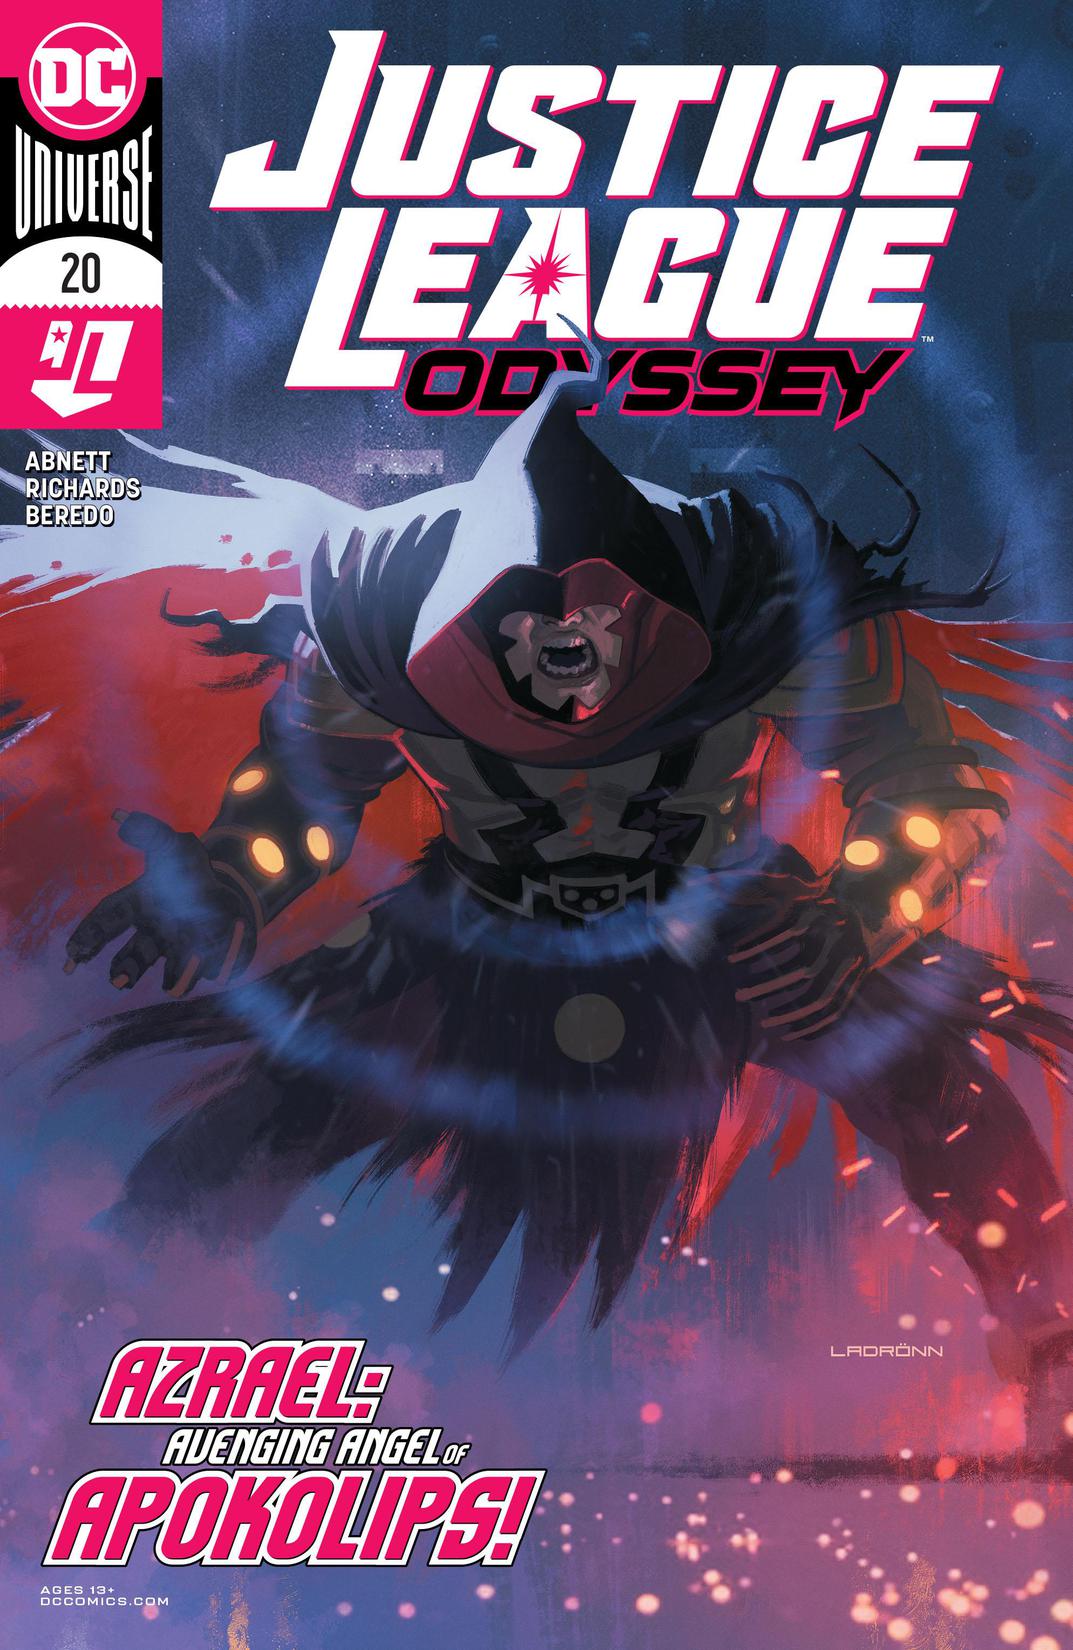 Justice League Odyssey #20 preview images